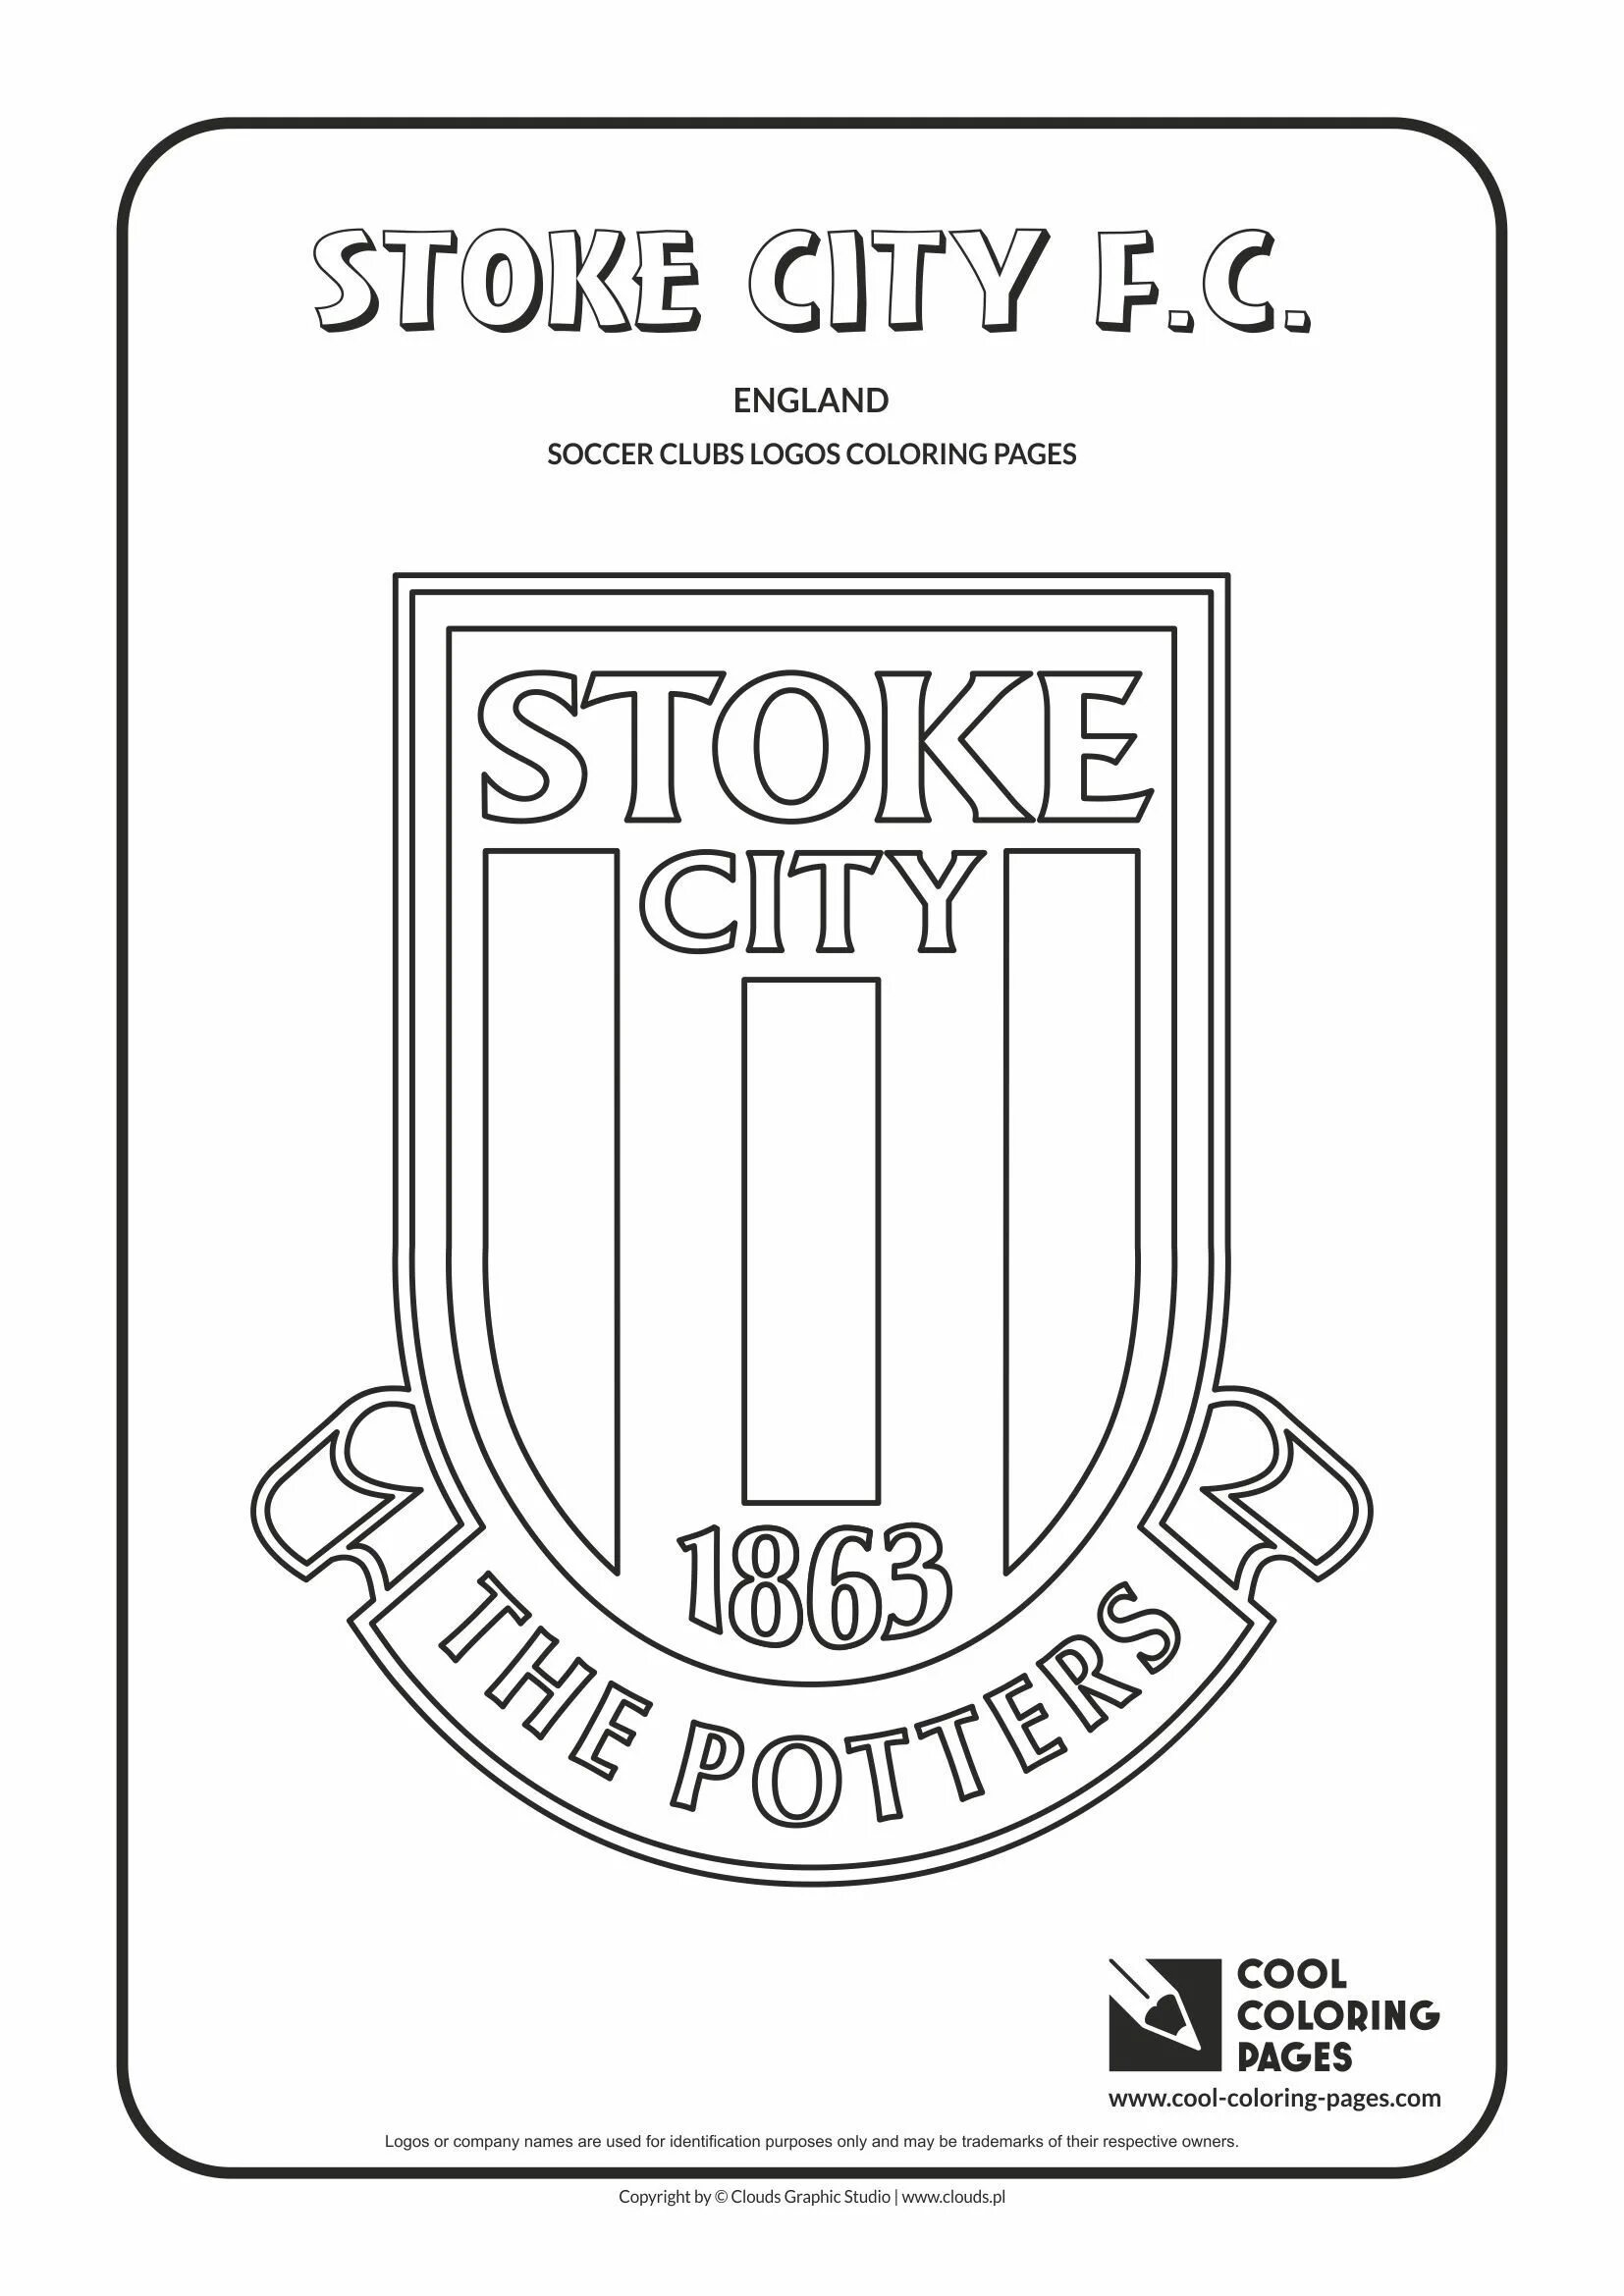 Coloring logos. Soccer Clubs logos Coloring Pages Манчестер Сити. Soccer logos Coloring Pages. Soccer Clubs logos Coloring. Soccer Clubs logos Coloring Pages.